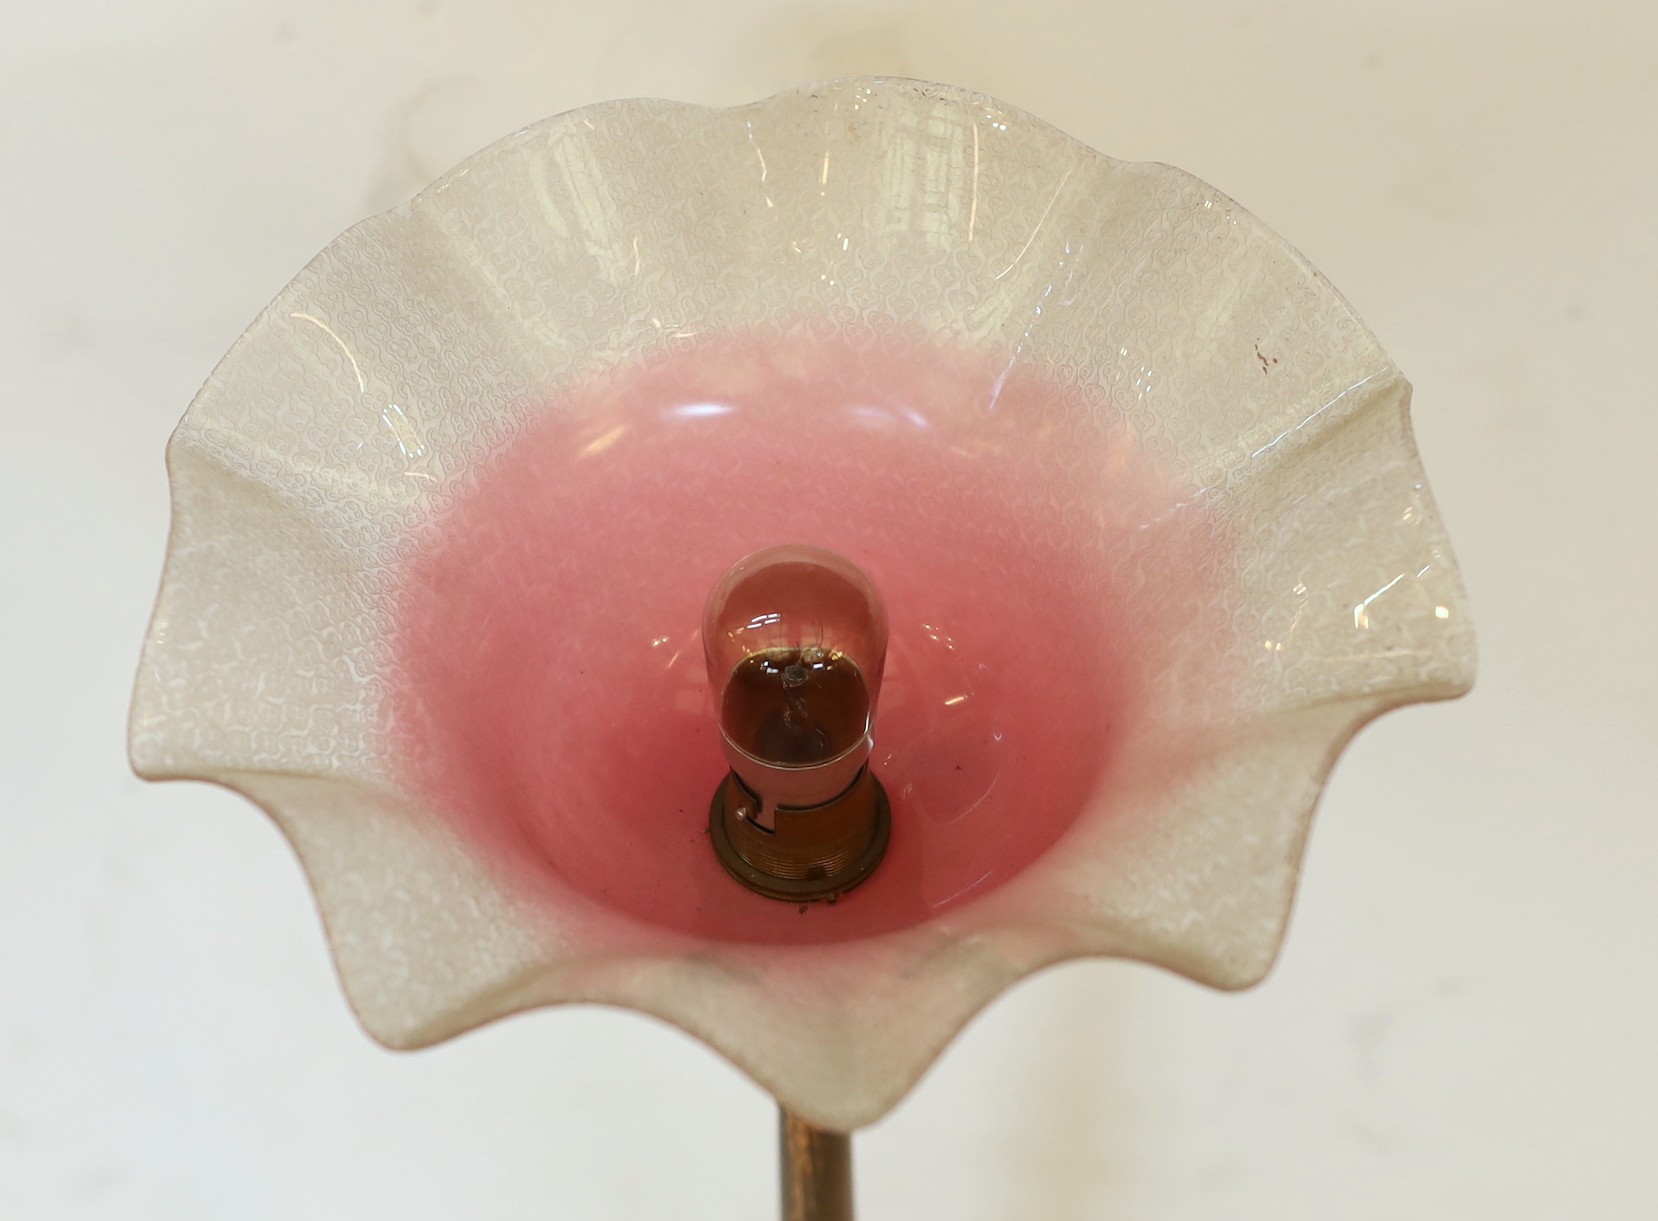 A late 19 century English lacquered bronze and glass table lamp with edged pink glass shade, height overall 51cm